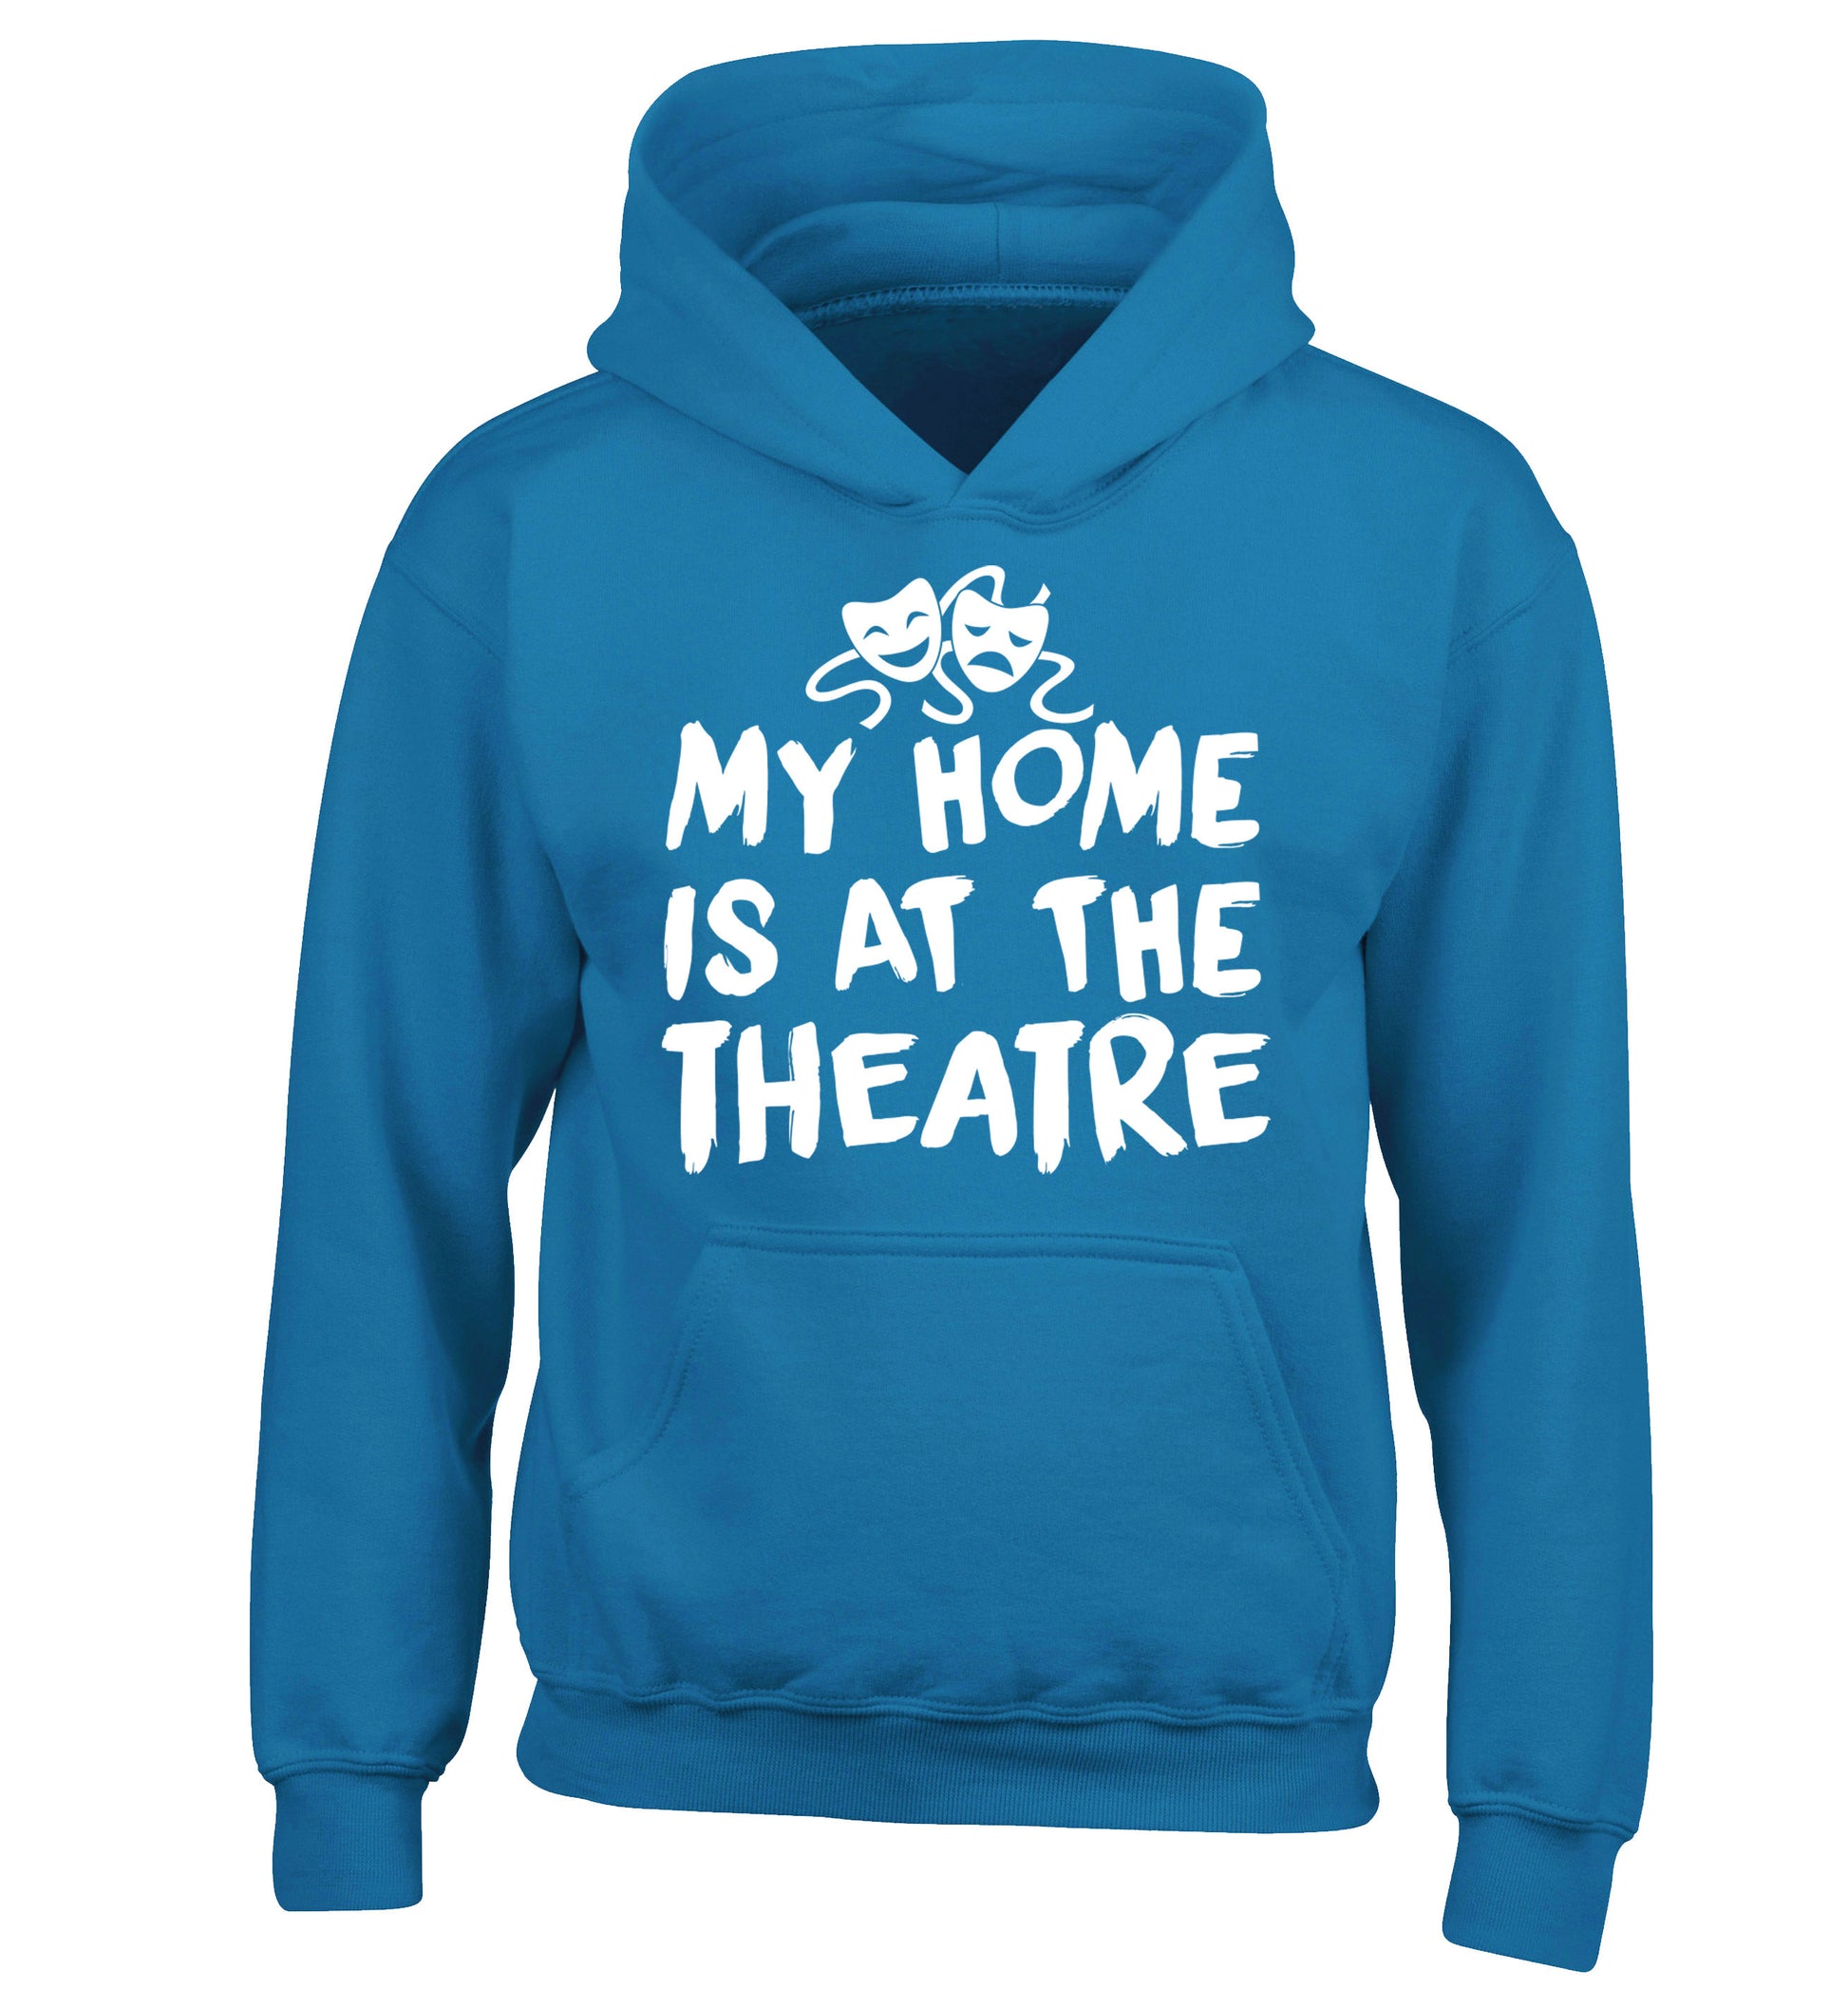 My home is at the theatre children's blue hoodie 12-14 Years